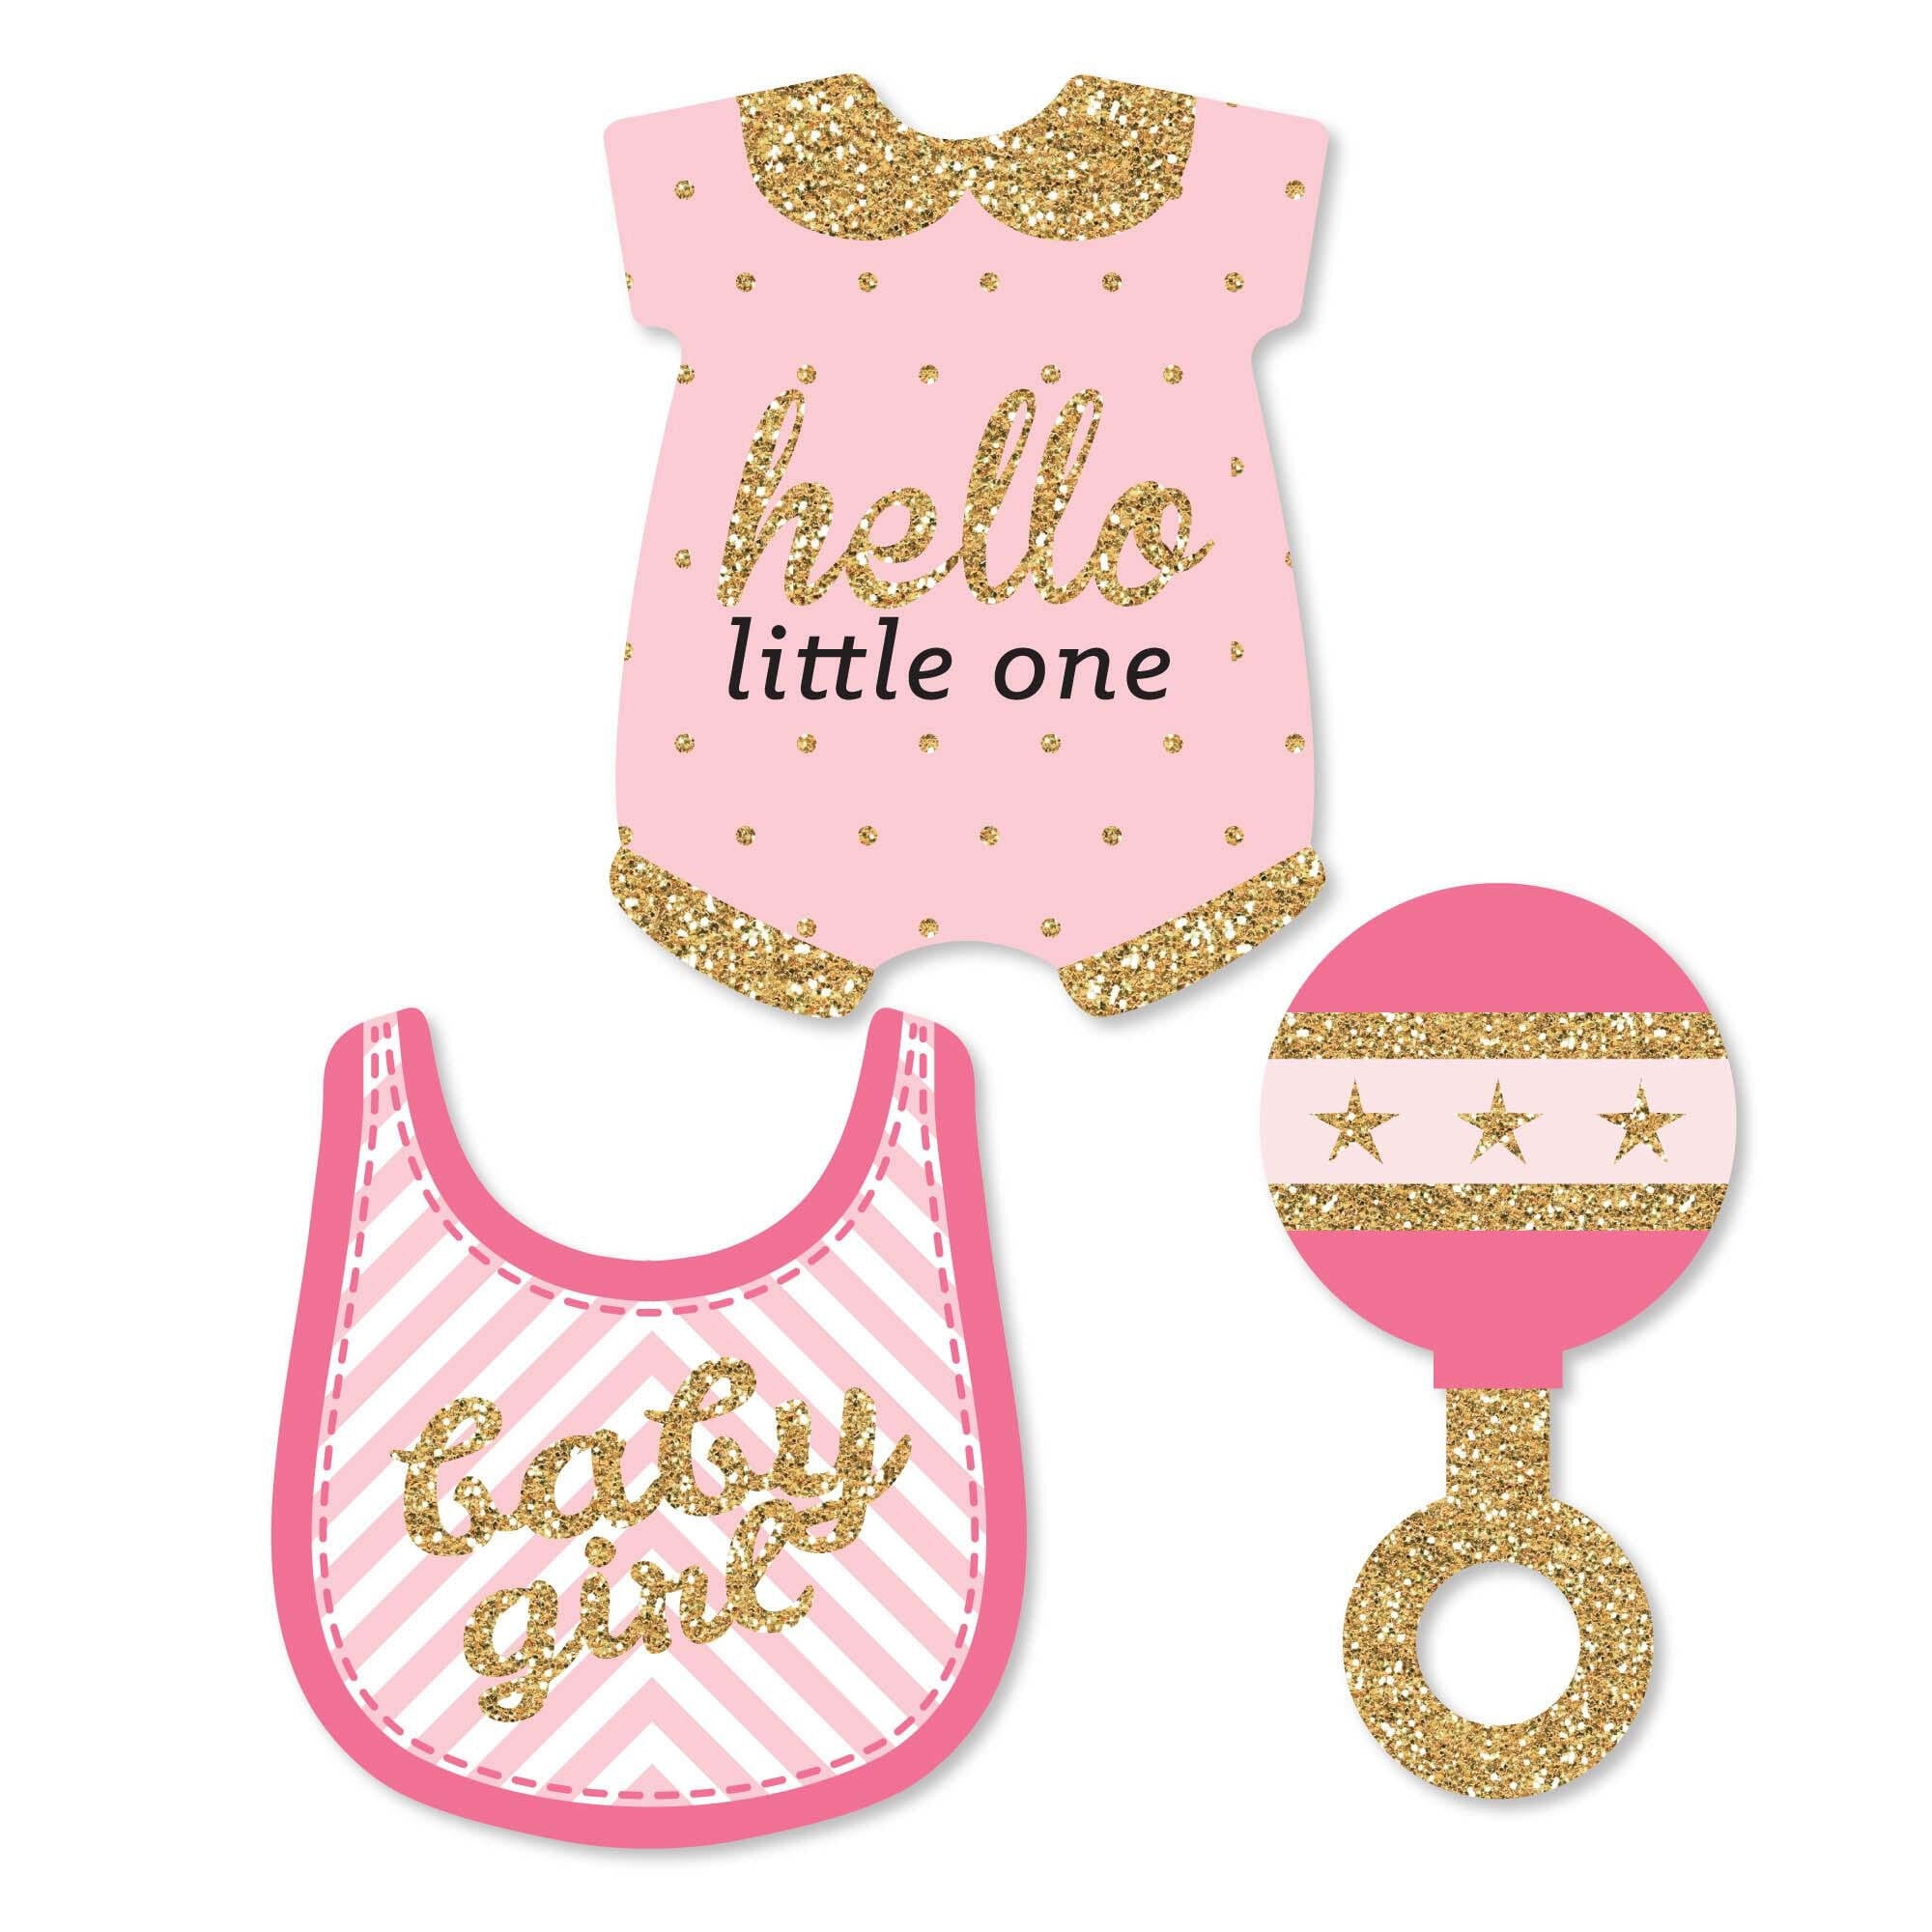 Big Dot of Happiness Hello Little One - Pink and Gold - DIY Shaped Girl Baby  Shower Party Cut-Outs - 24 Count 